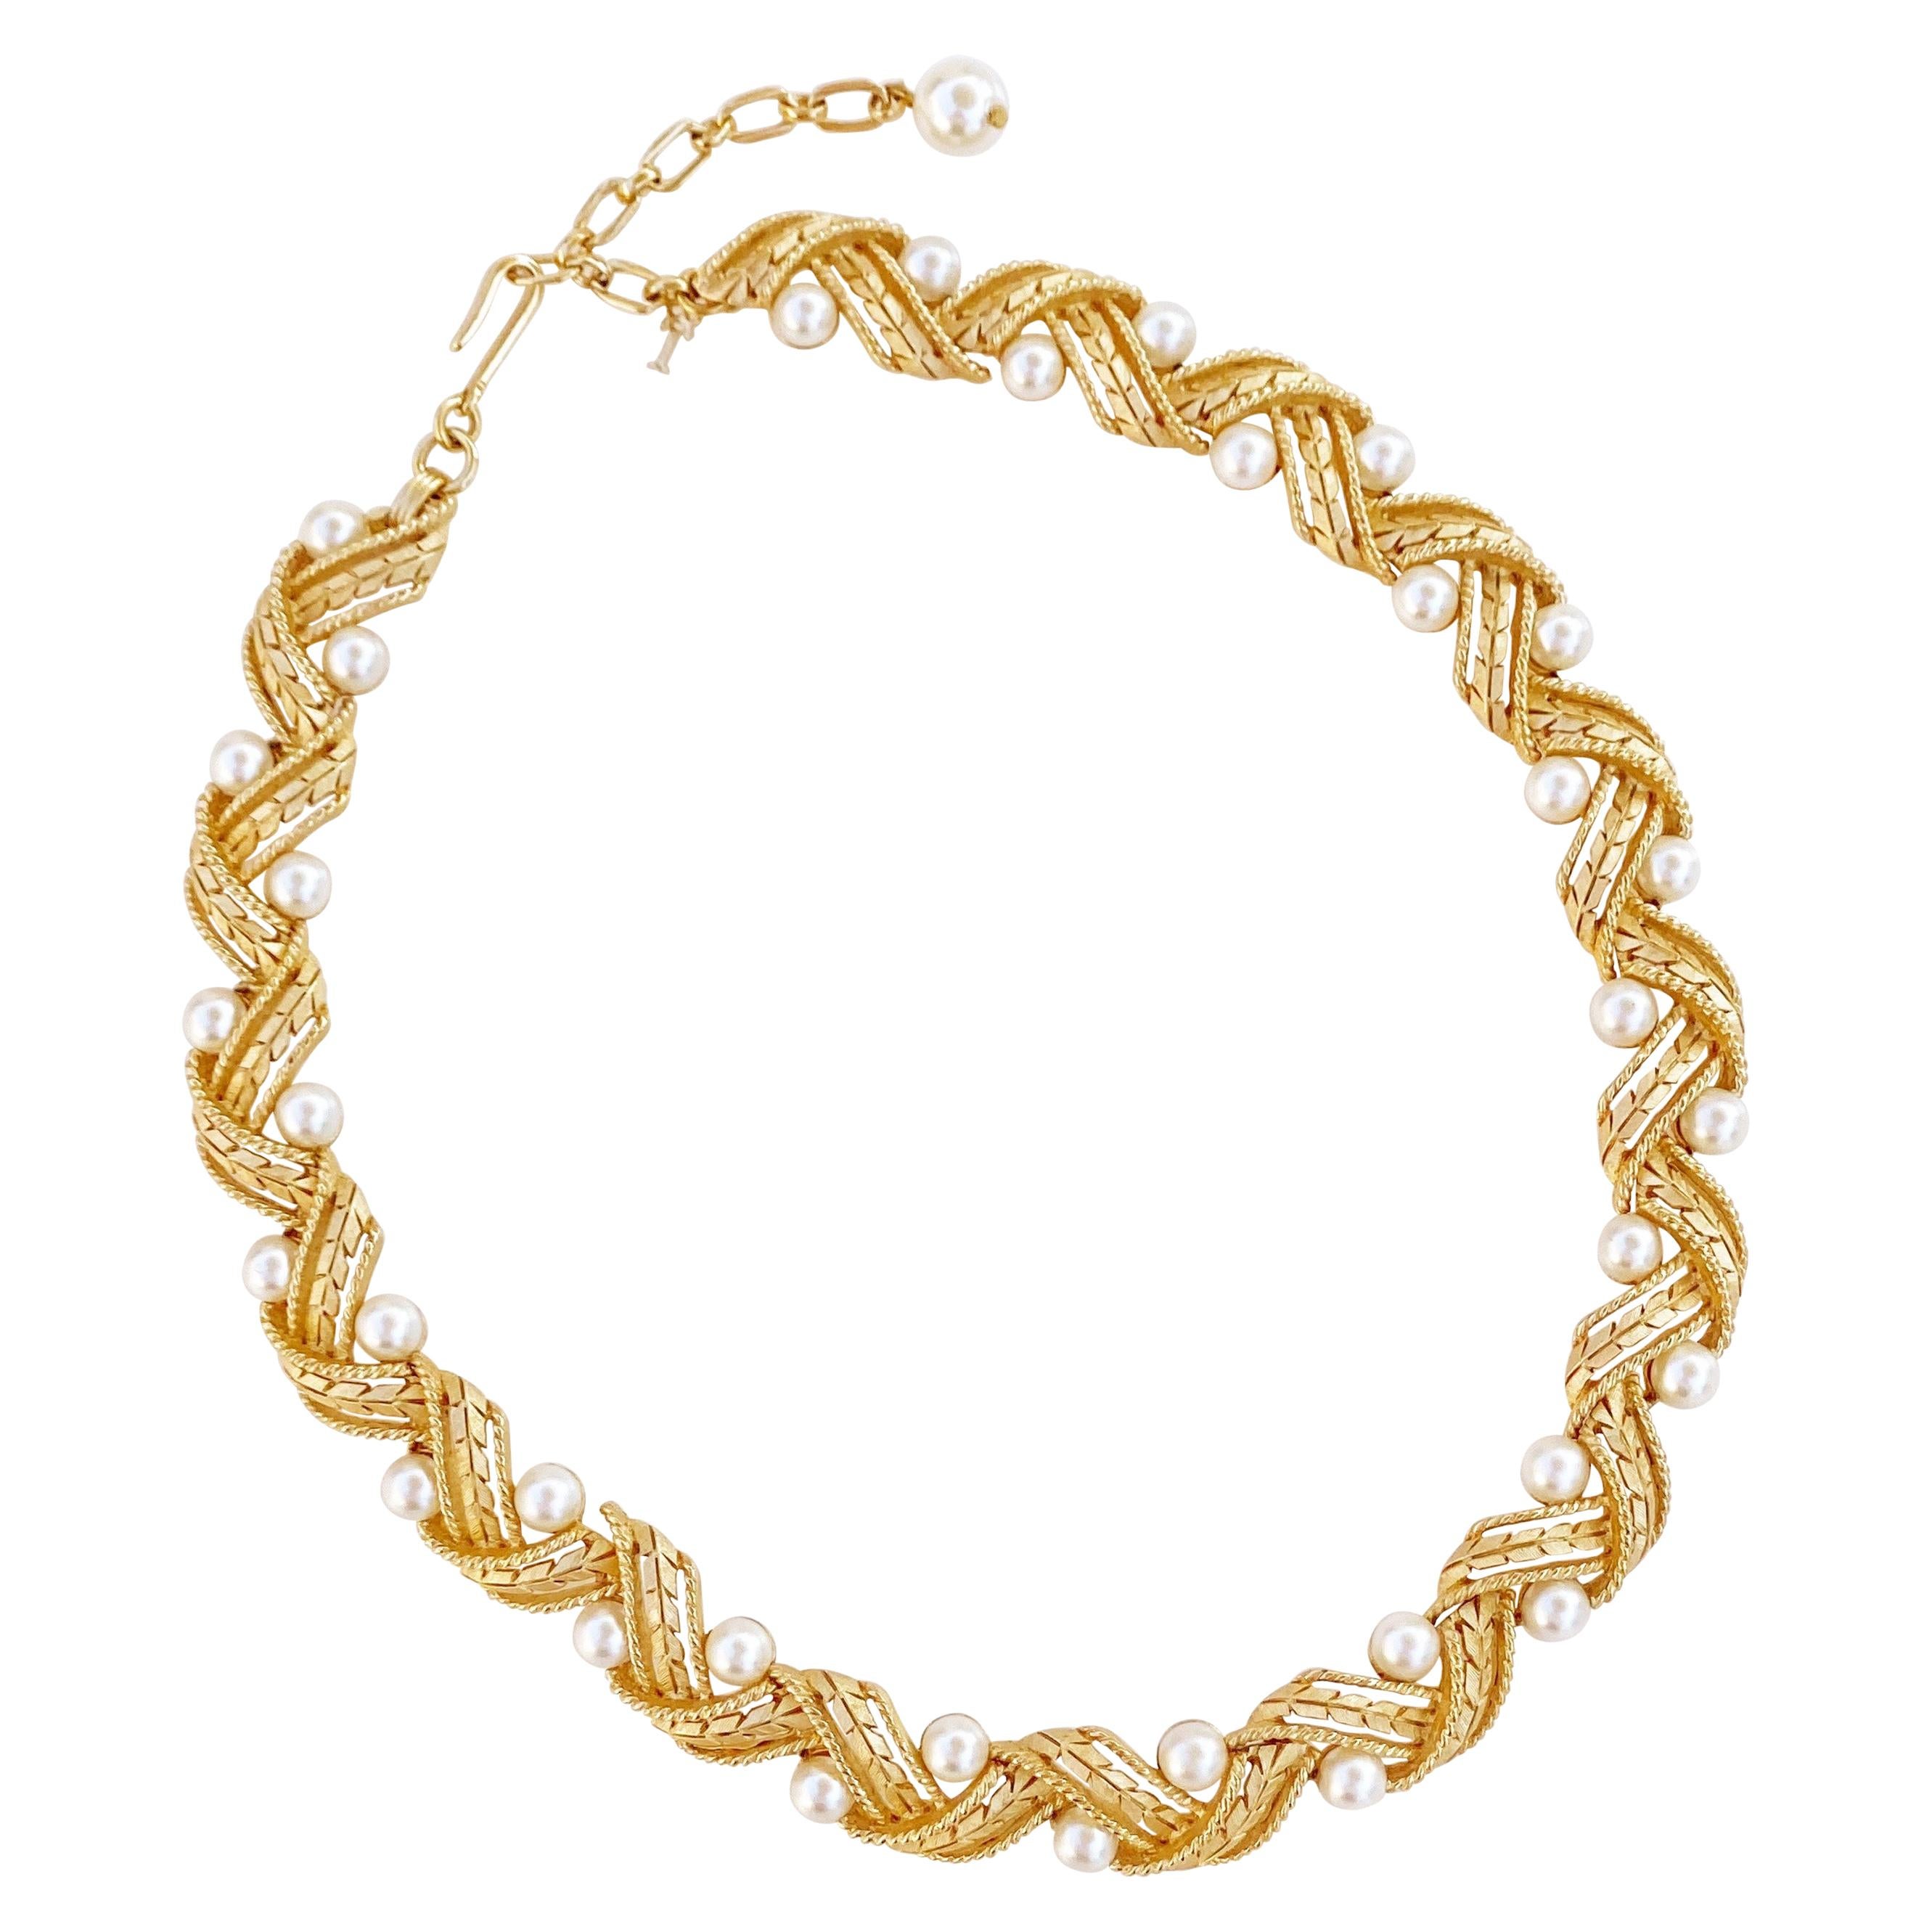 Gilt & Pearl Choker Necklace With Leaf Motif By Crown Trifari, 1950s